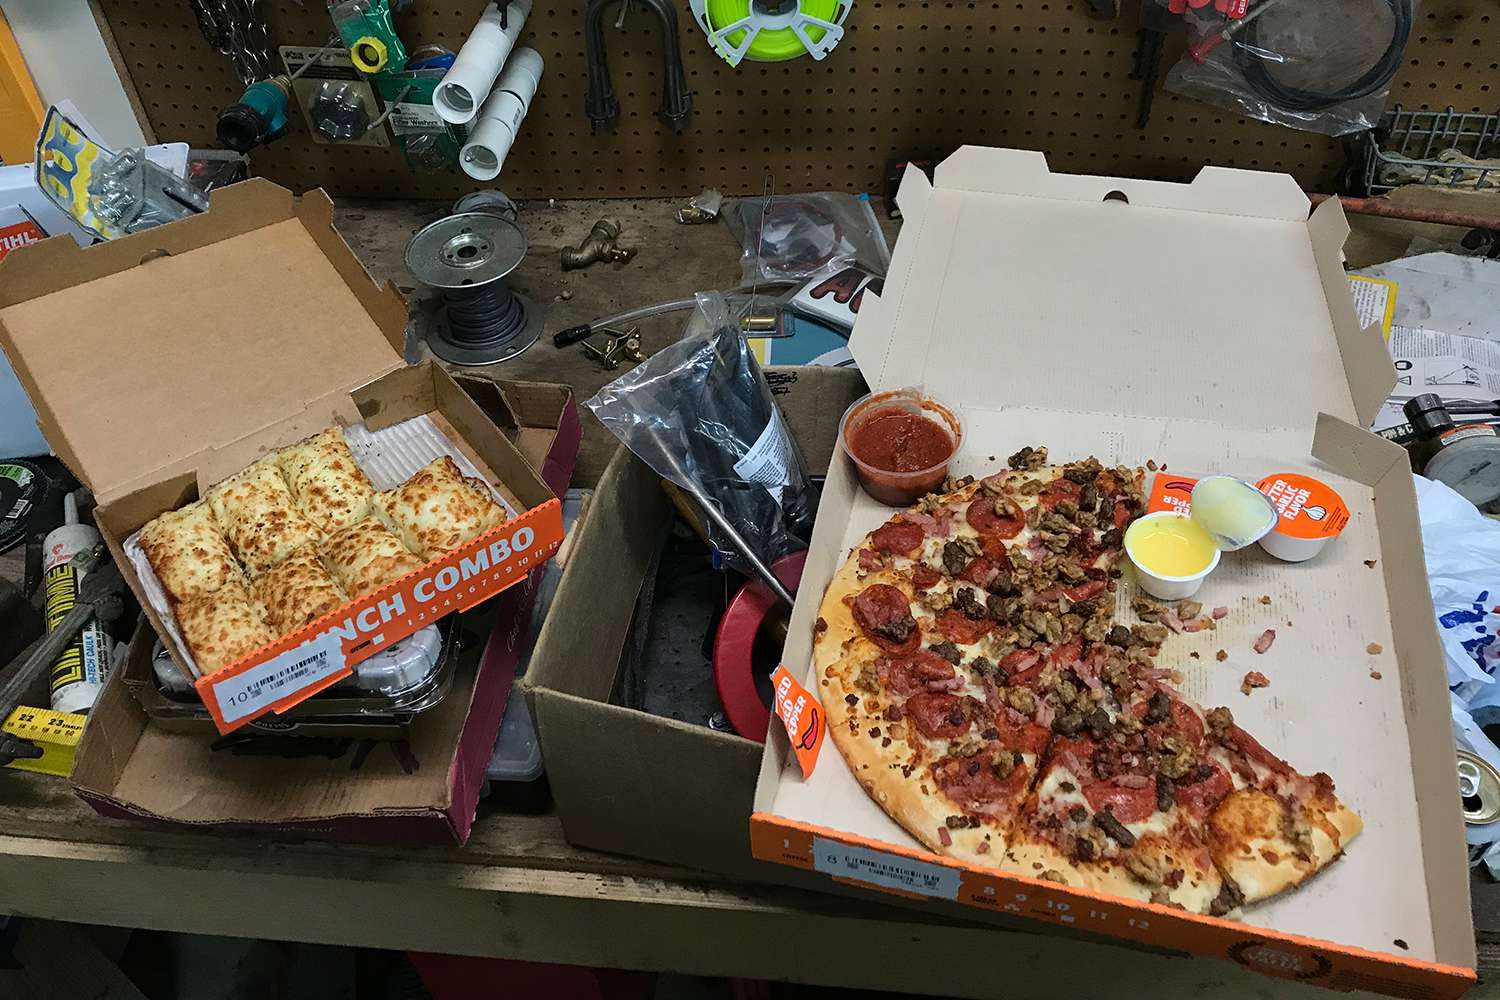 And any job like this is flat incomplete without greasy pizza loaded with meat. Just looking at this picture makes me want the exact same thing again. Like right now. 